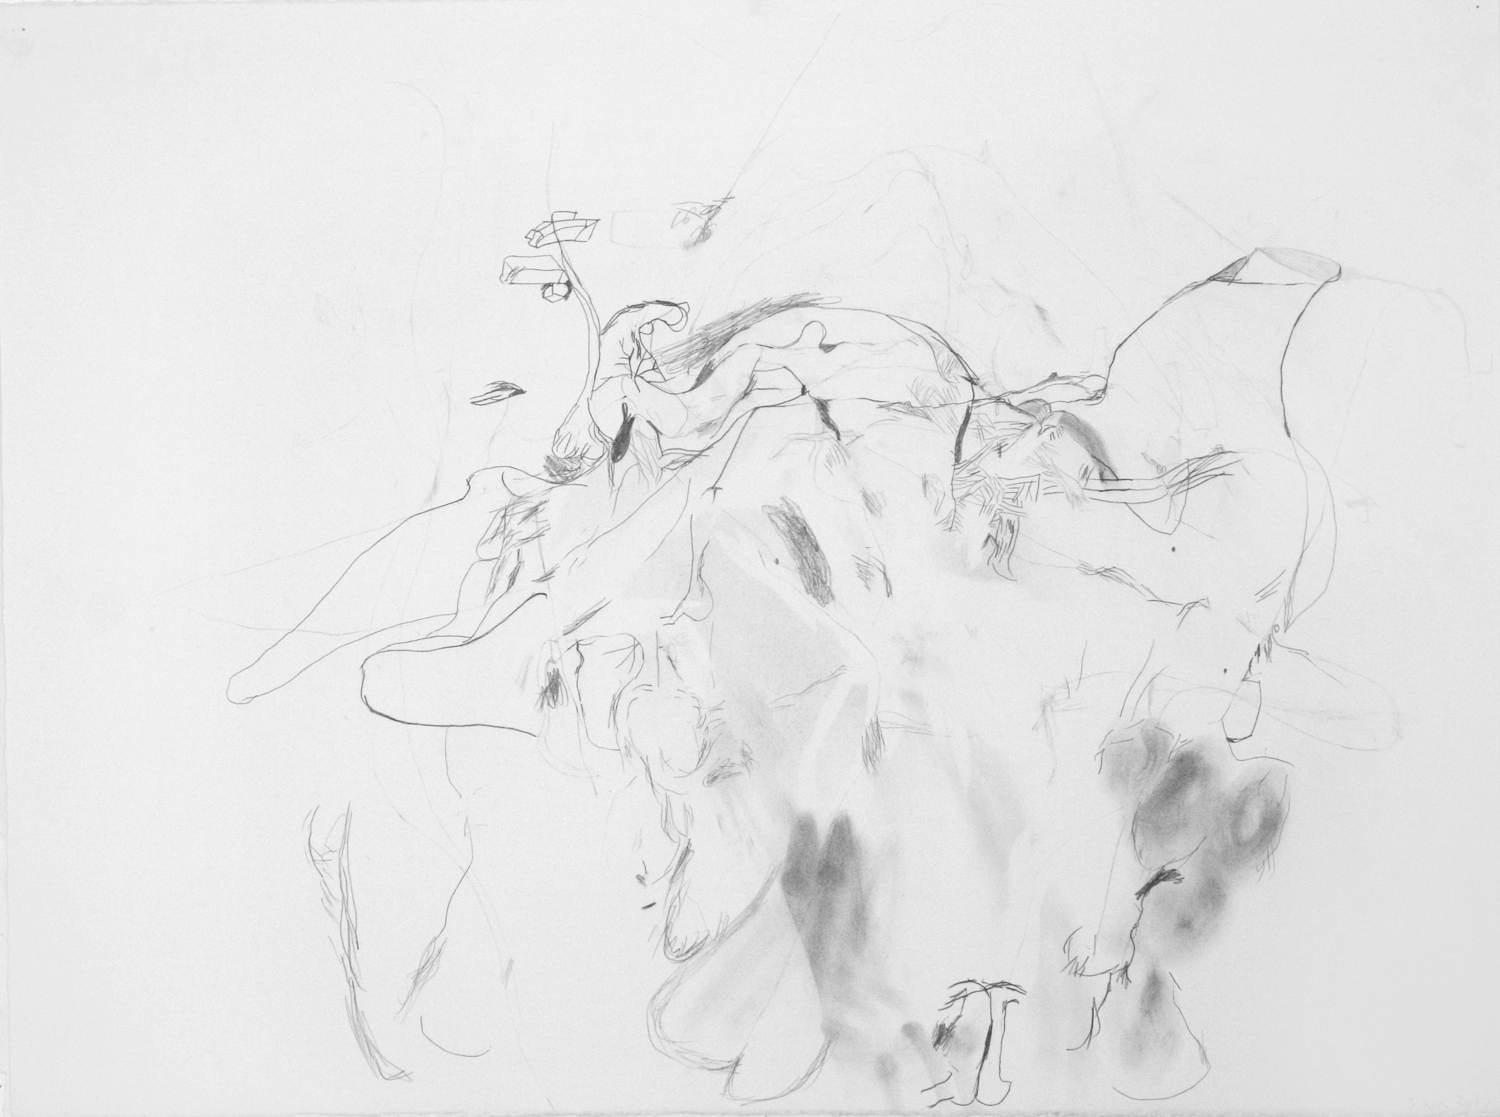  Untitled, 2013.22" x 30", pencil on paper.  